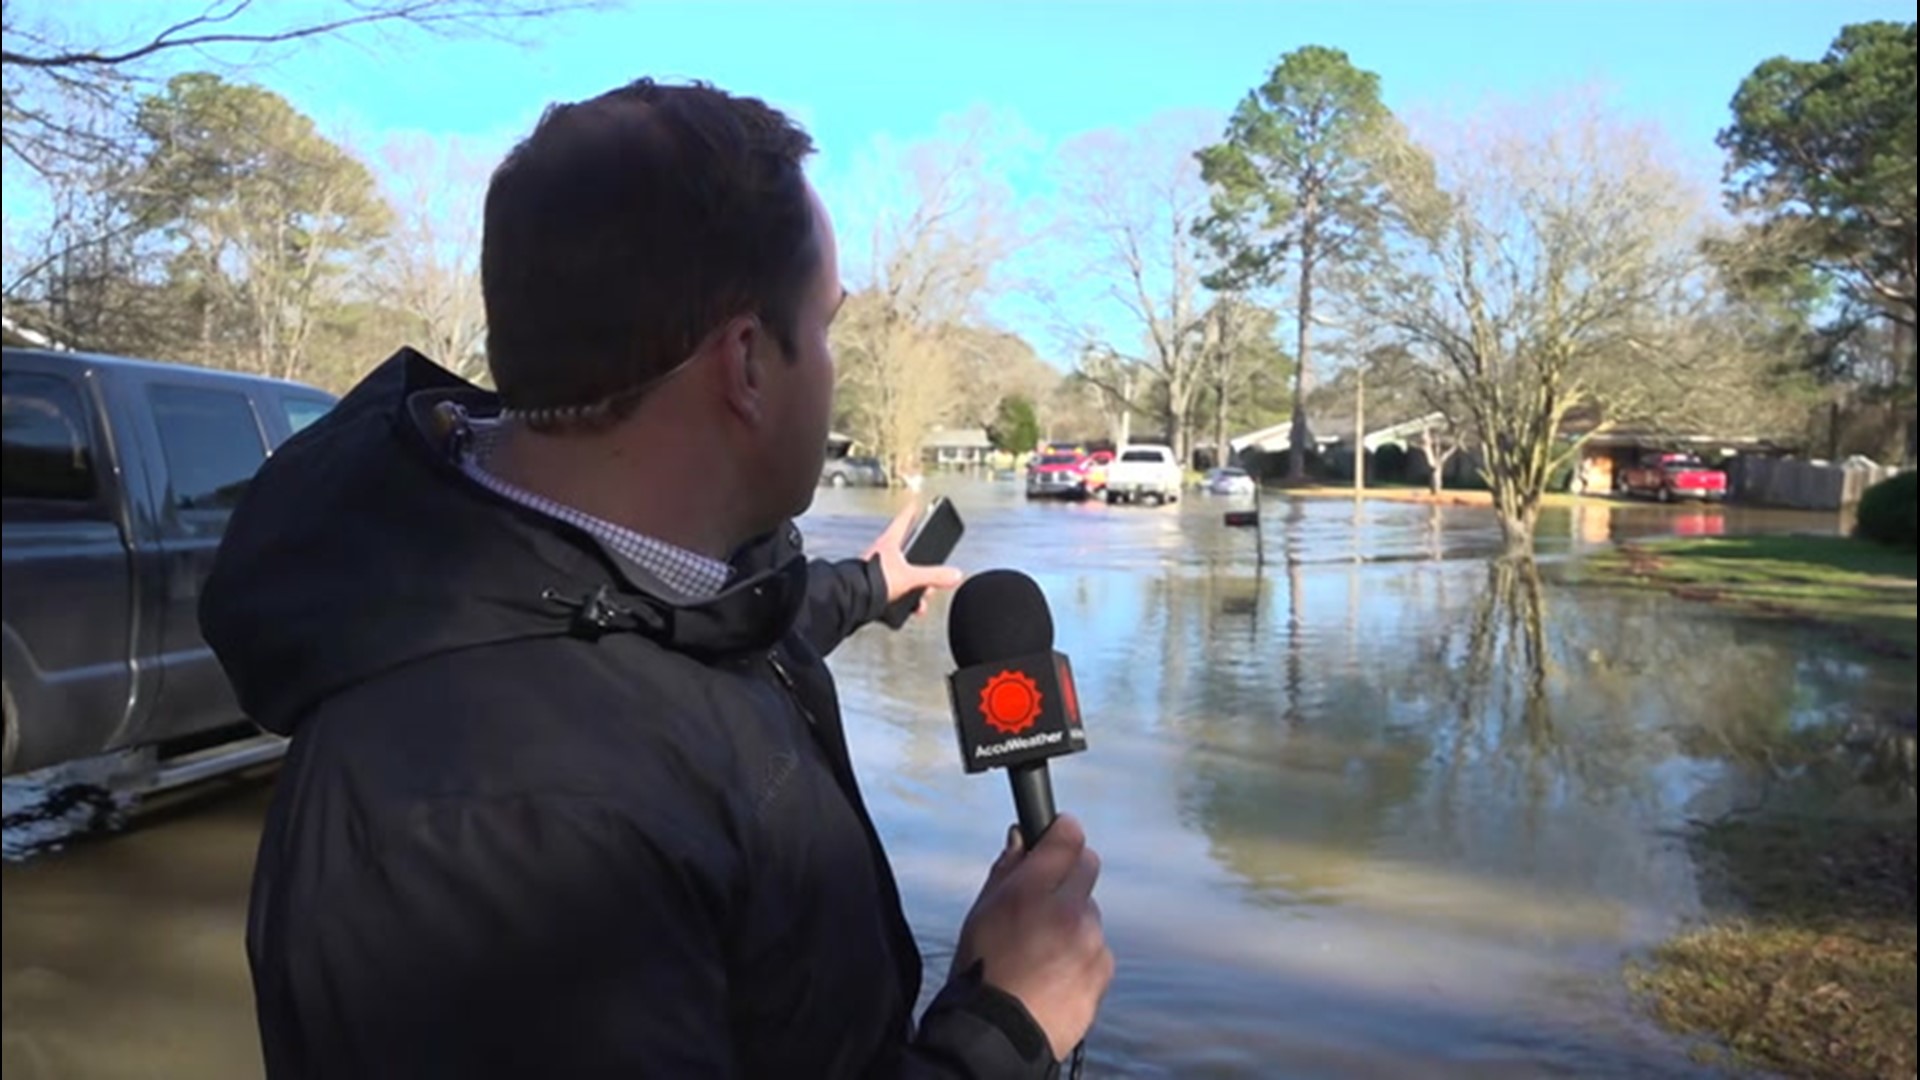 Officials at Barnett Reservoir said they were working hard on Feb. 14 to delay the release of flood waters expected to impact Jackson, Mississippi over the weekend.